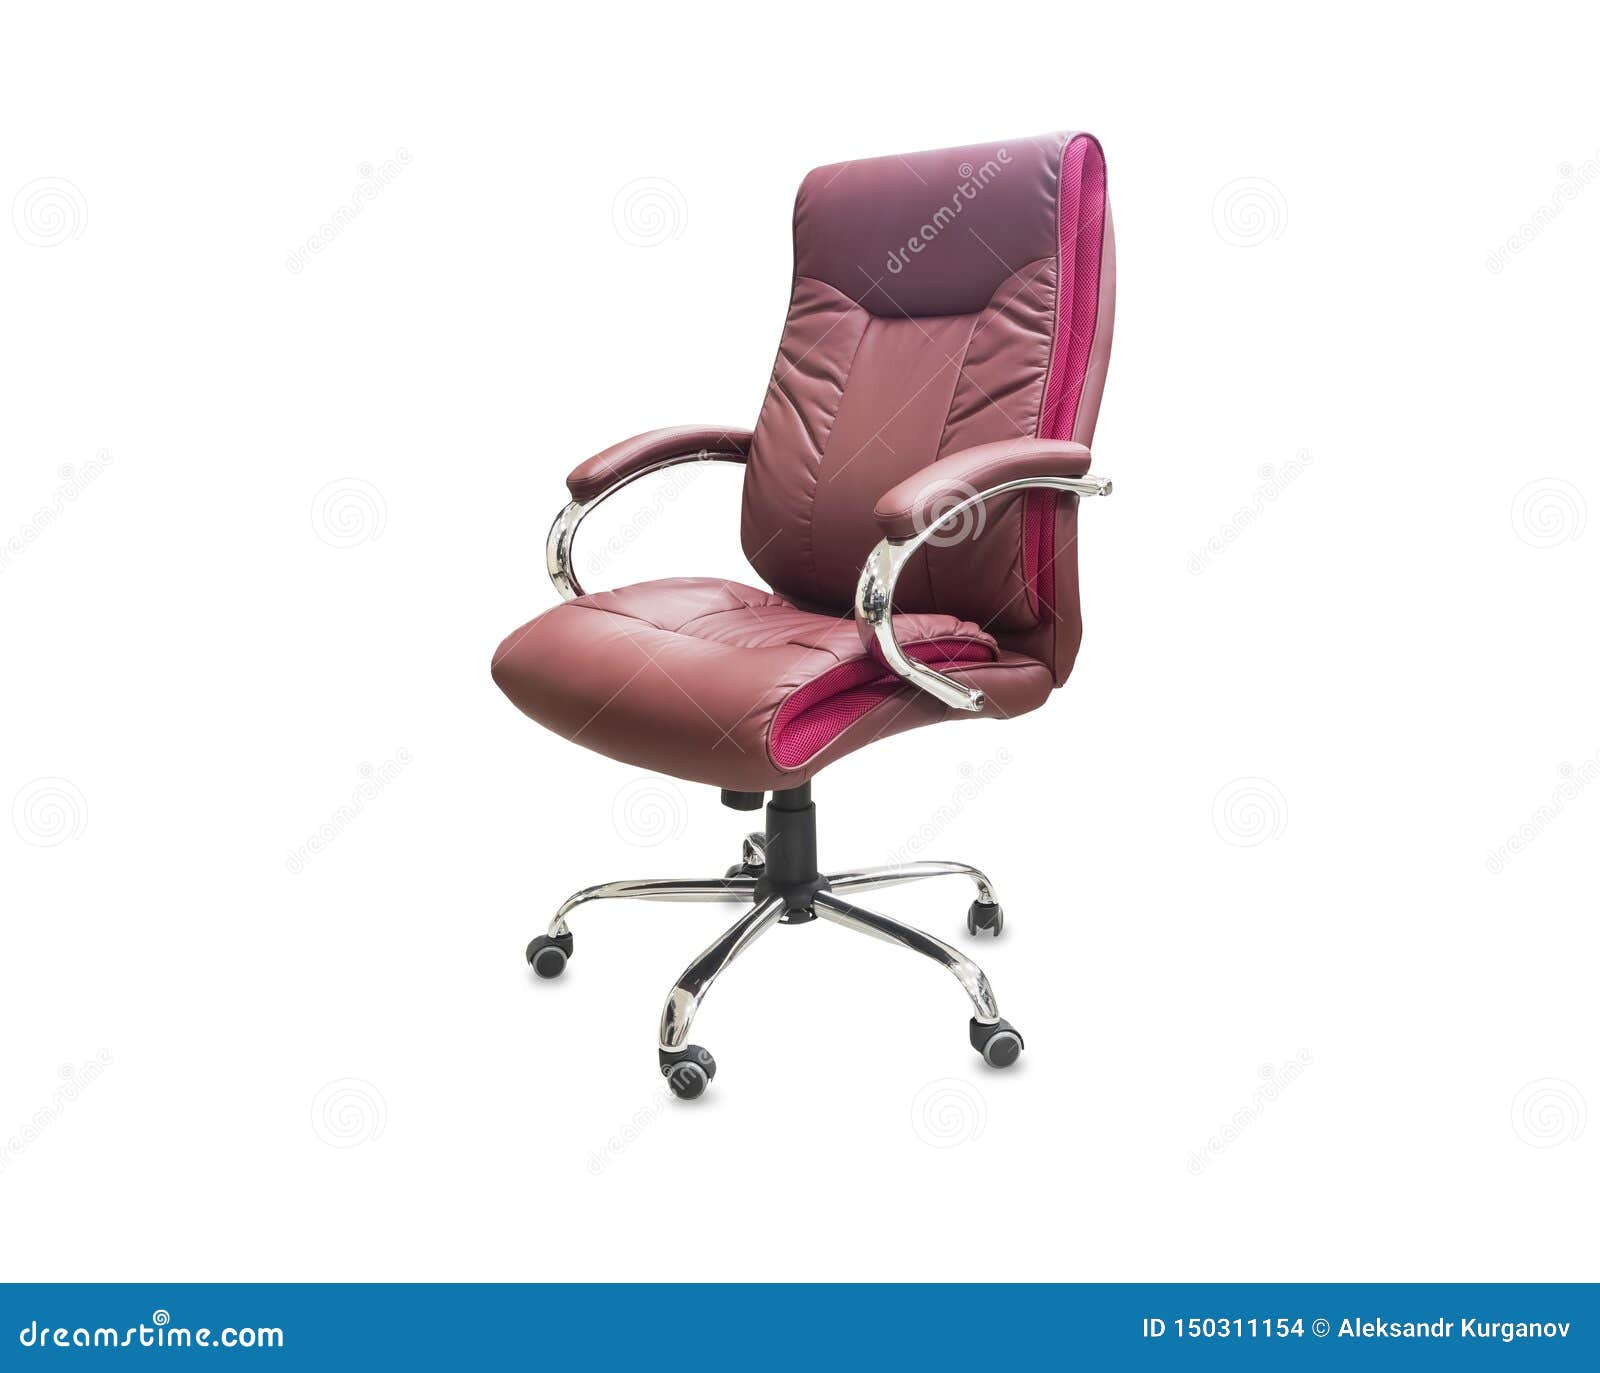 The office chair from wine-colored leather. Isolated over white